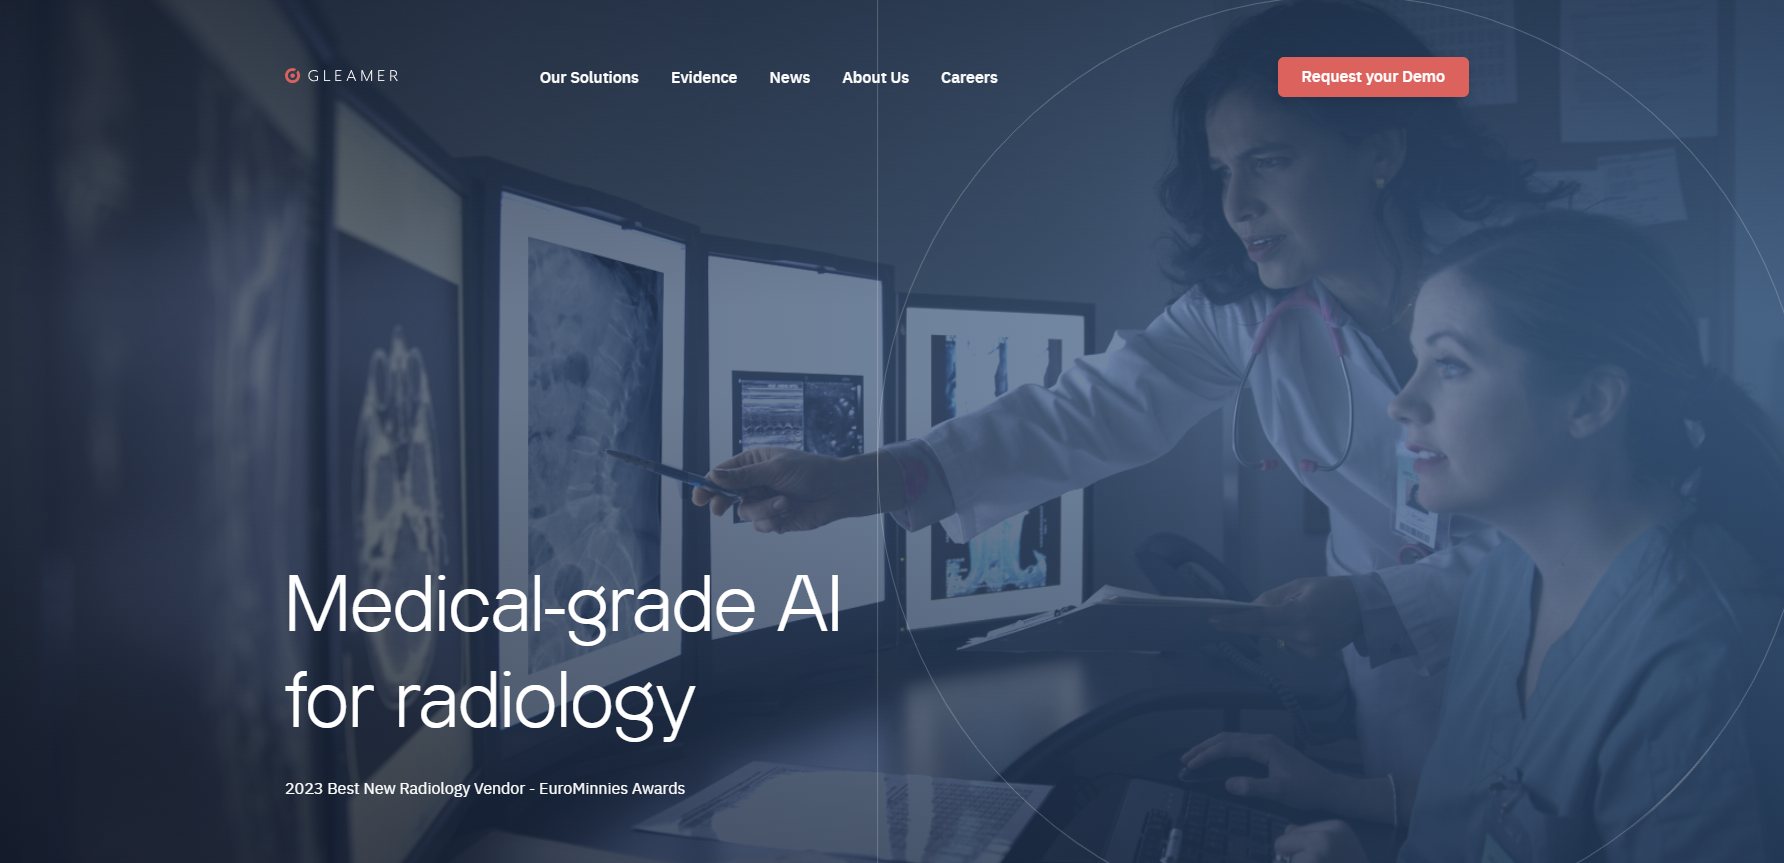 With $40M raised, GLEAMER revolutionizes radiology with its suite of AI solutions.